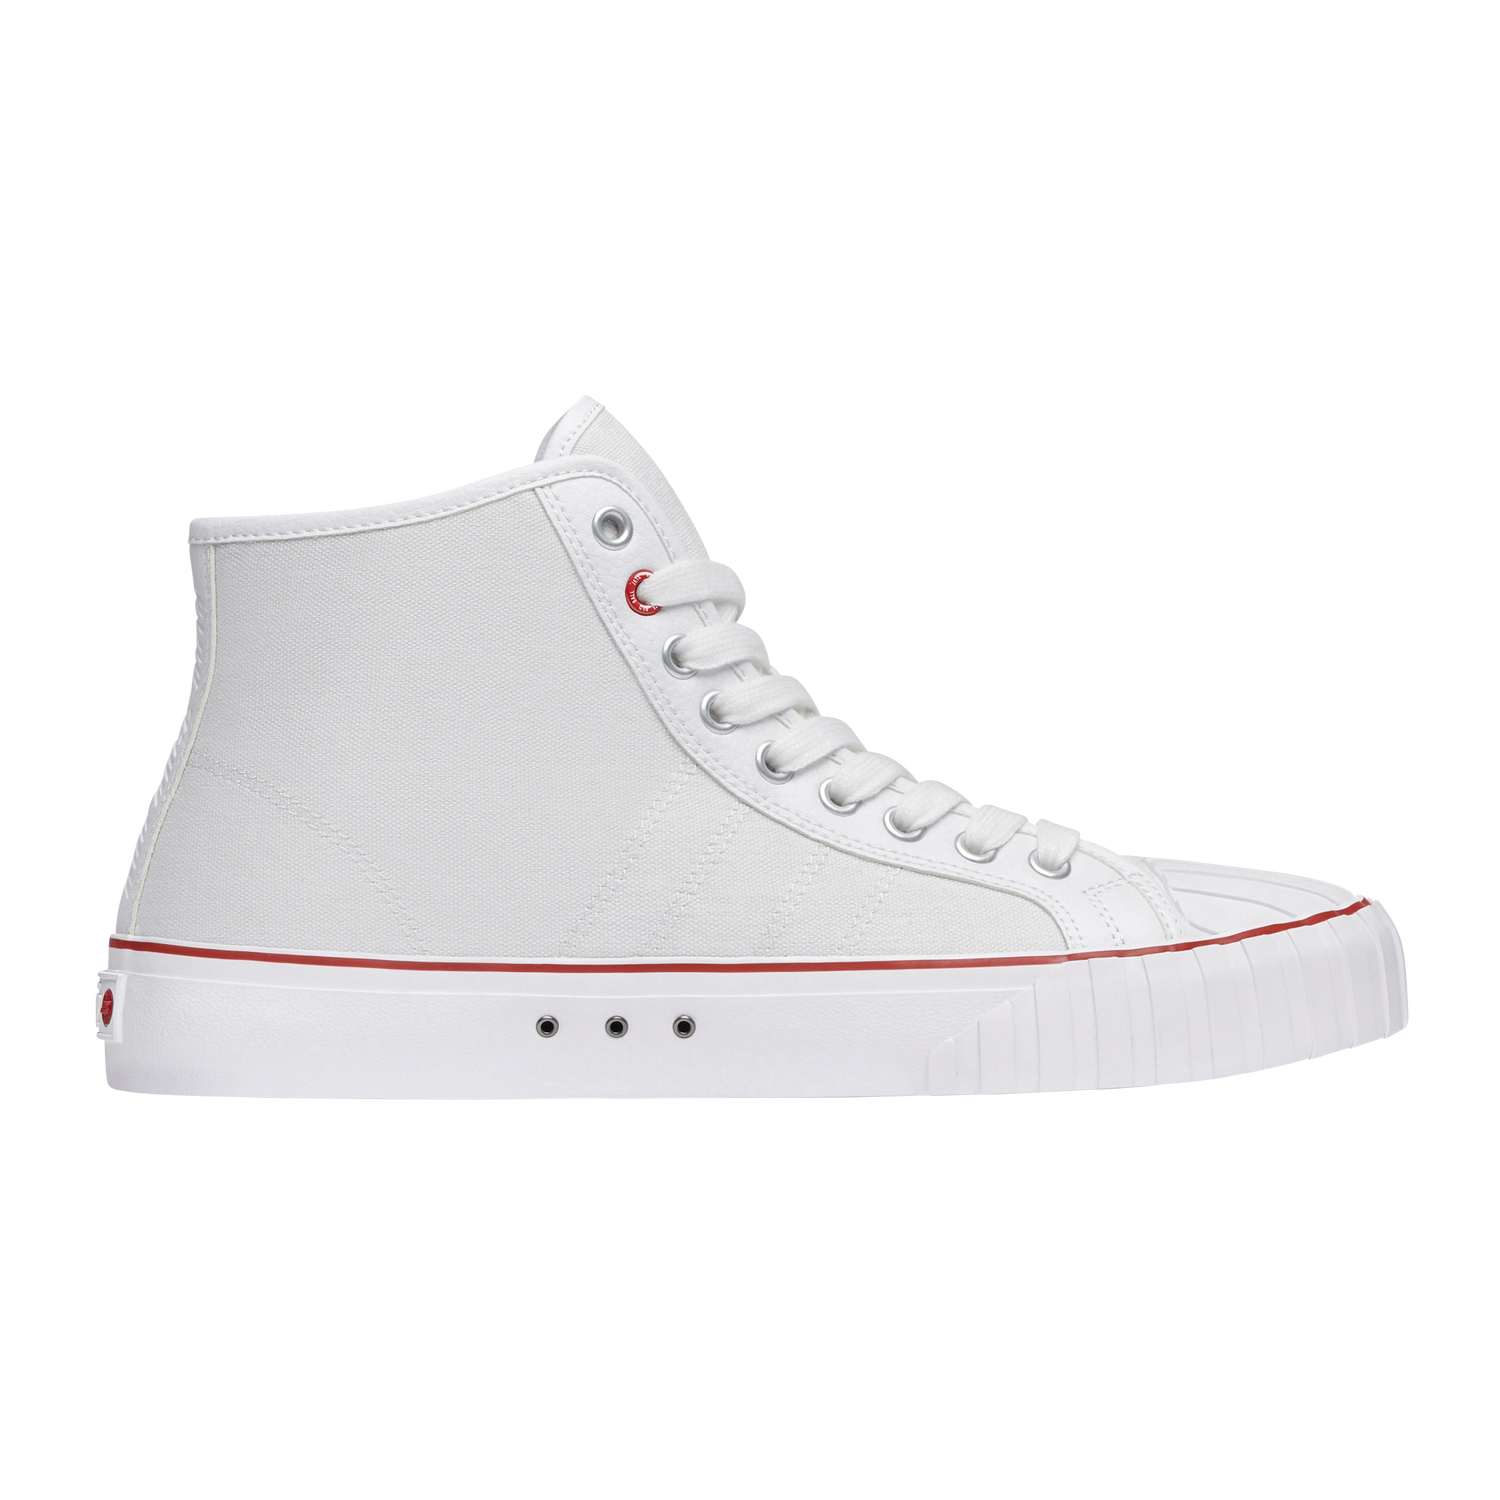 alternate side view of the white 51 hi